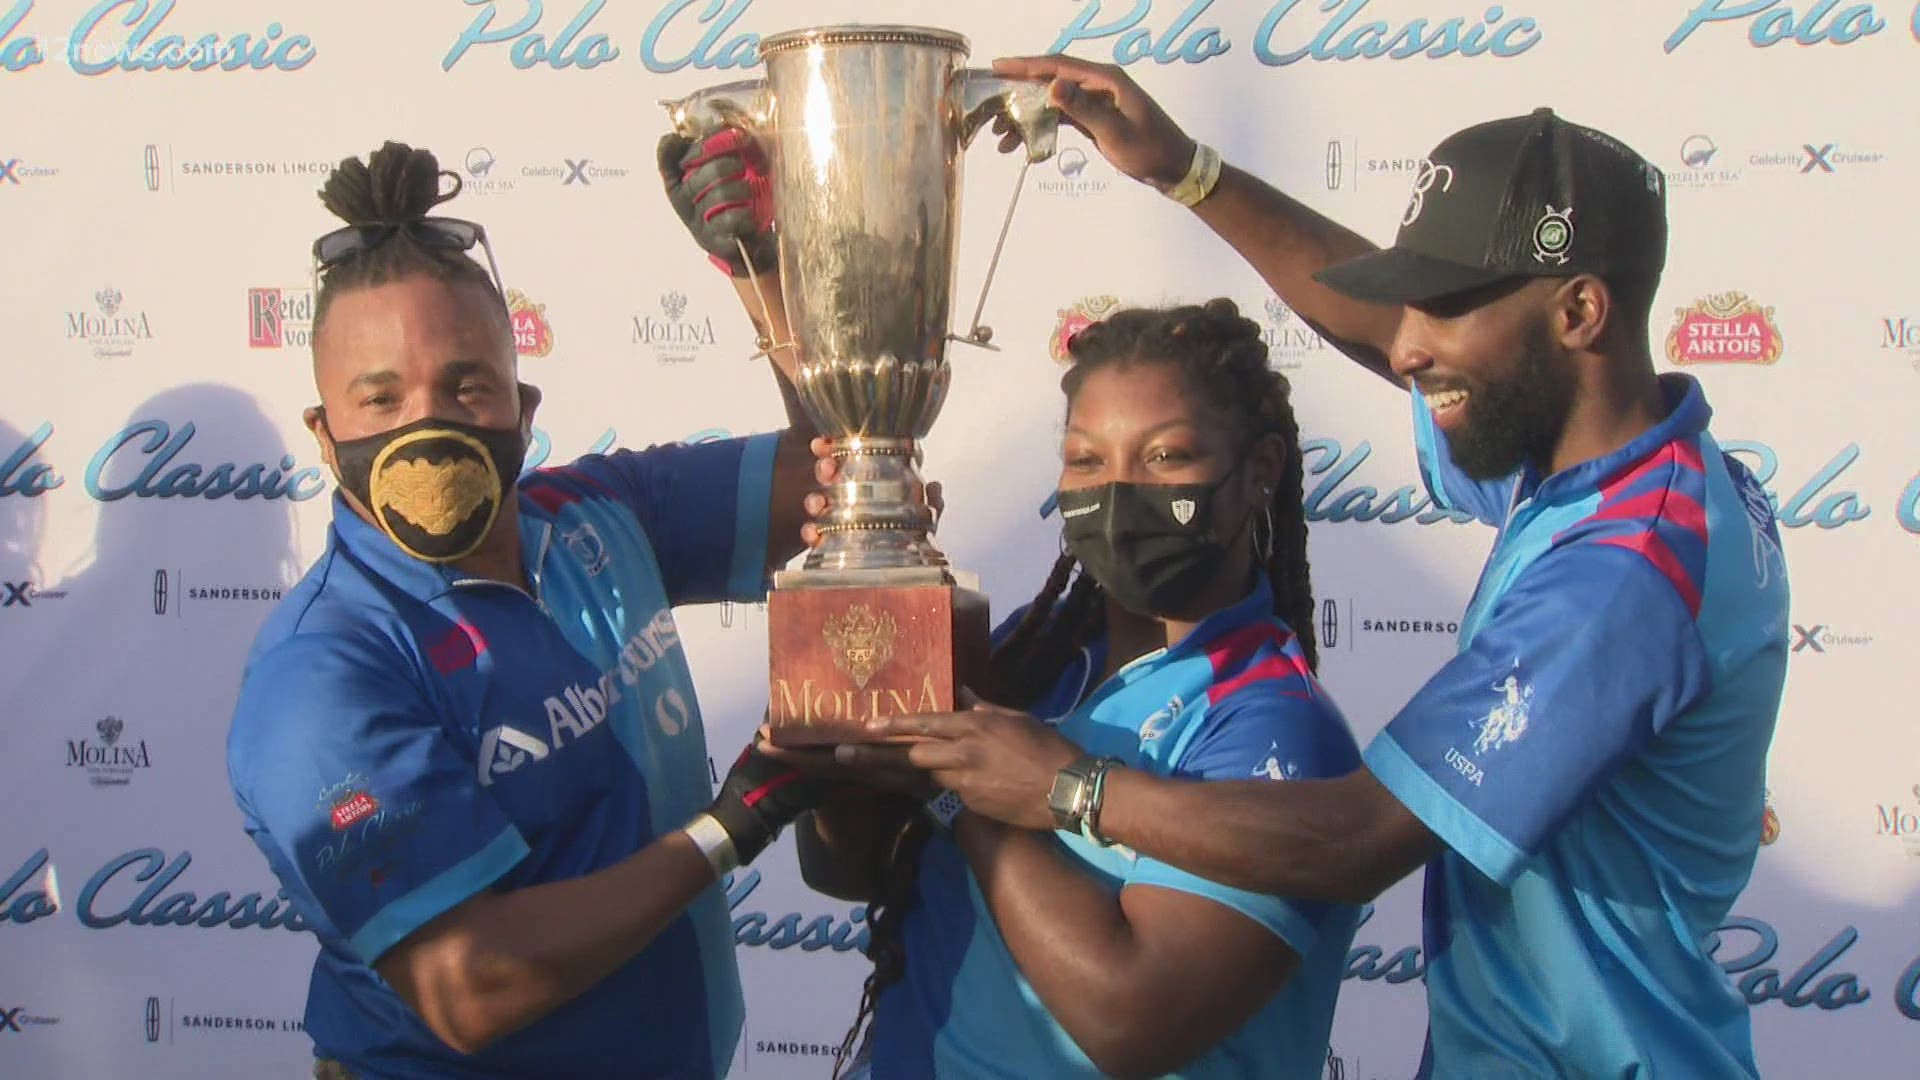 The annual Polo Classic took place in Scottsdale and it featured teams with lots of diversity. The winners, an all-Black team, took an inspiring route to get there.